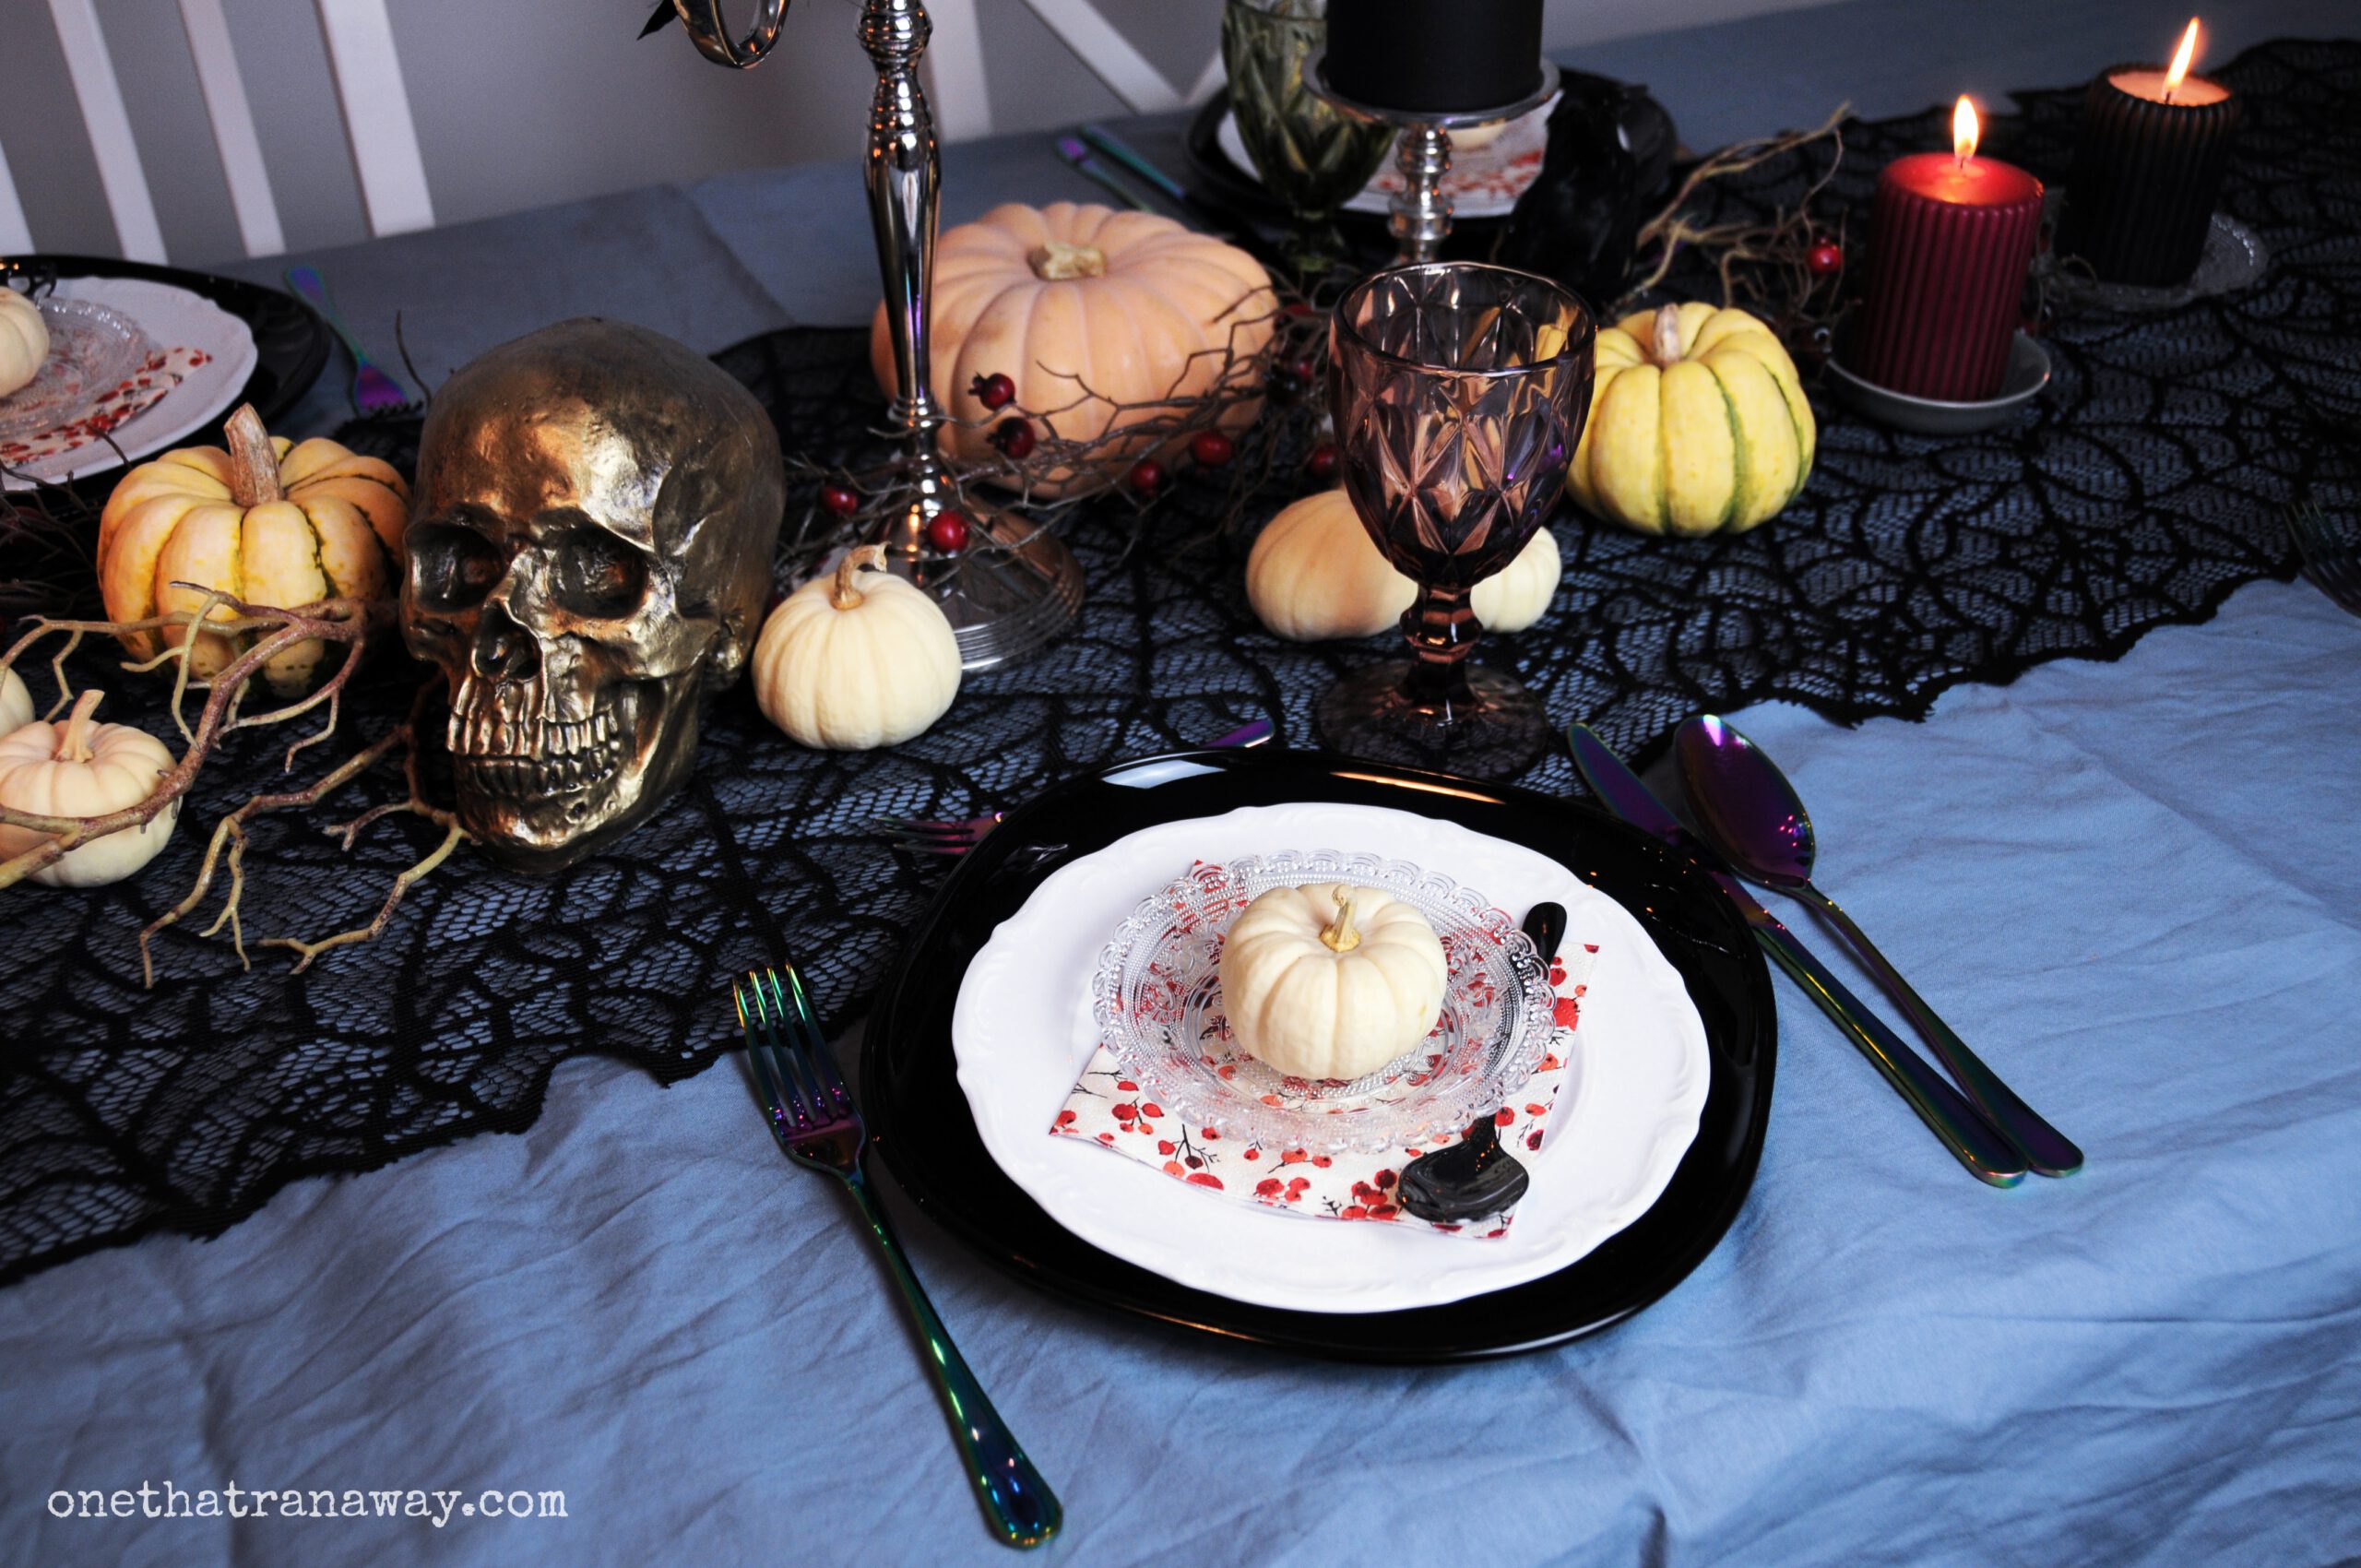 tablescape for a spooky elegant Halloween dinner party with black candles, a black spider web table runner and different pumpkins for decoration